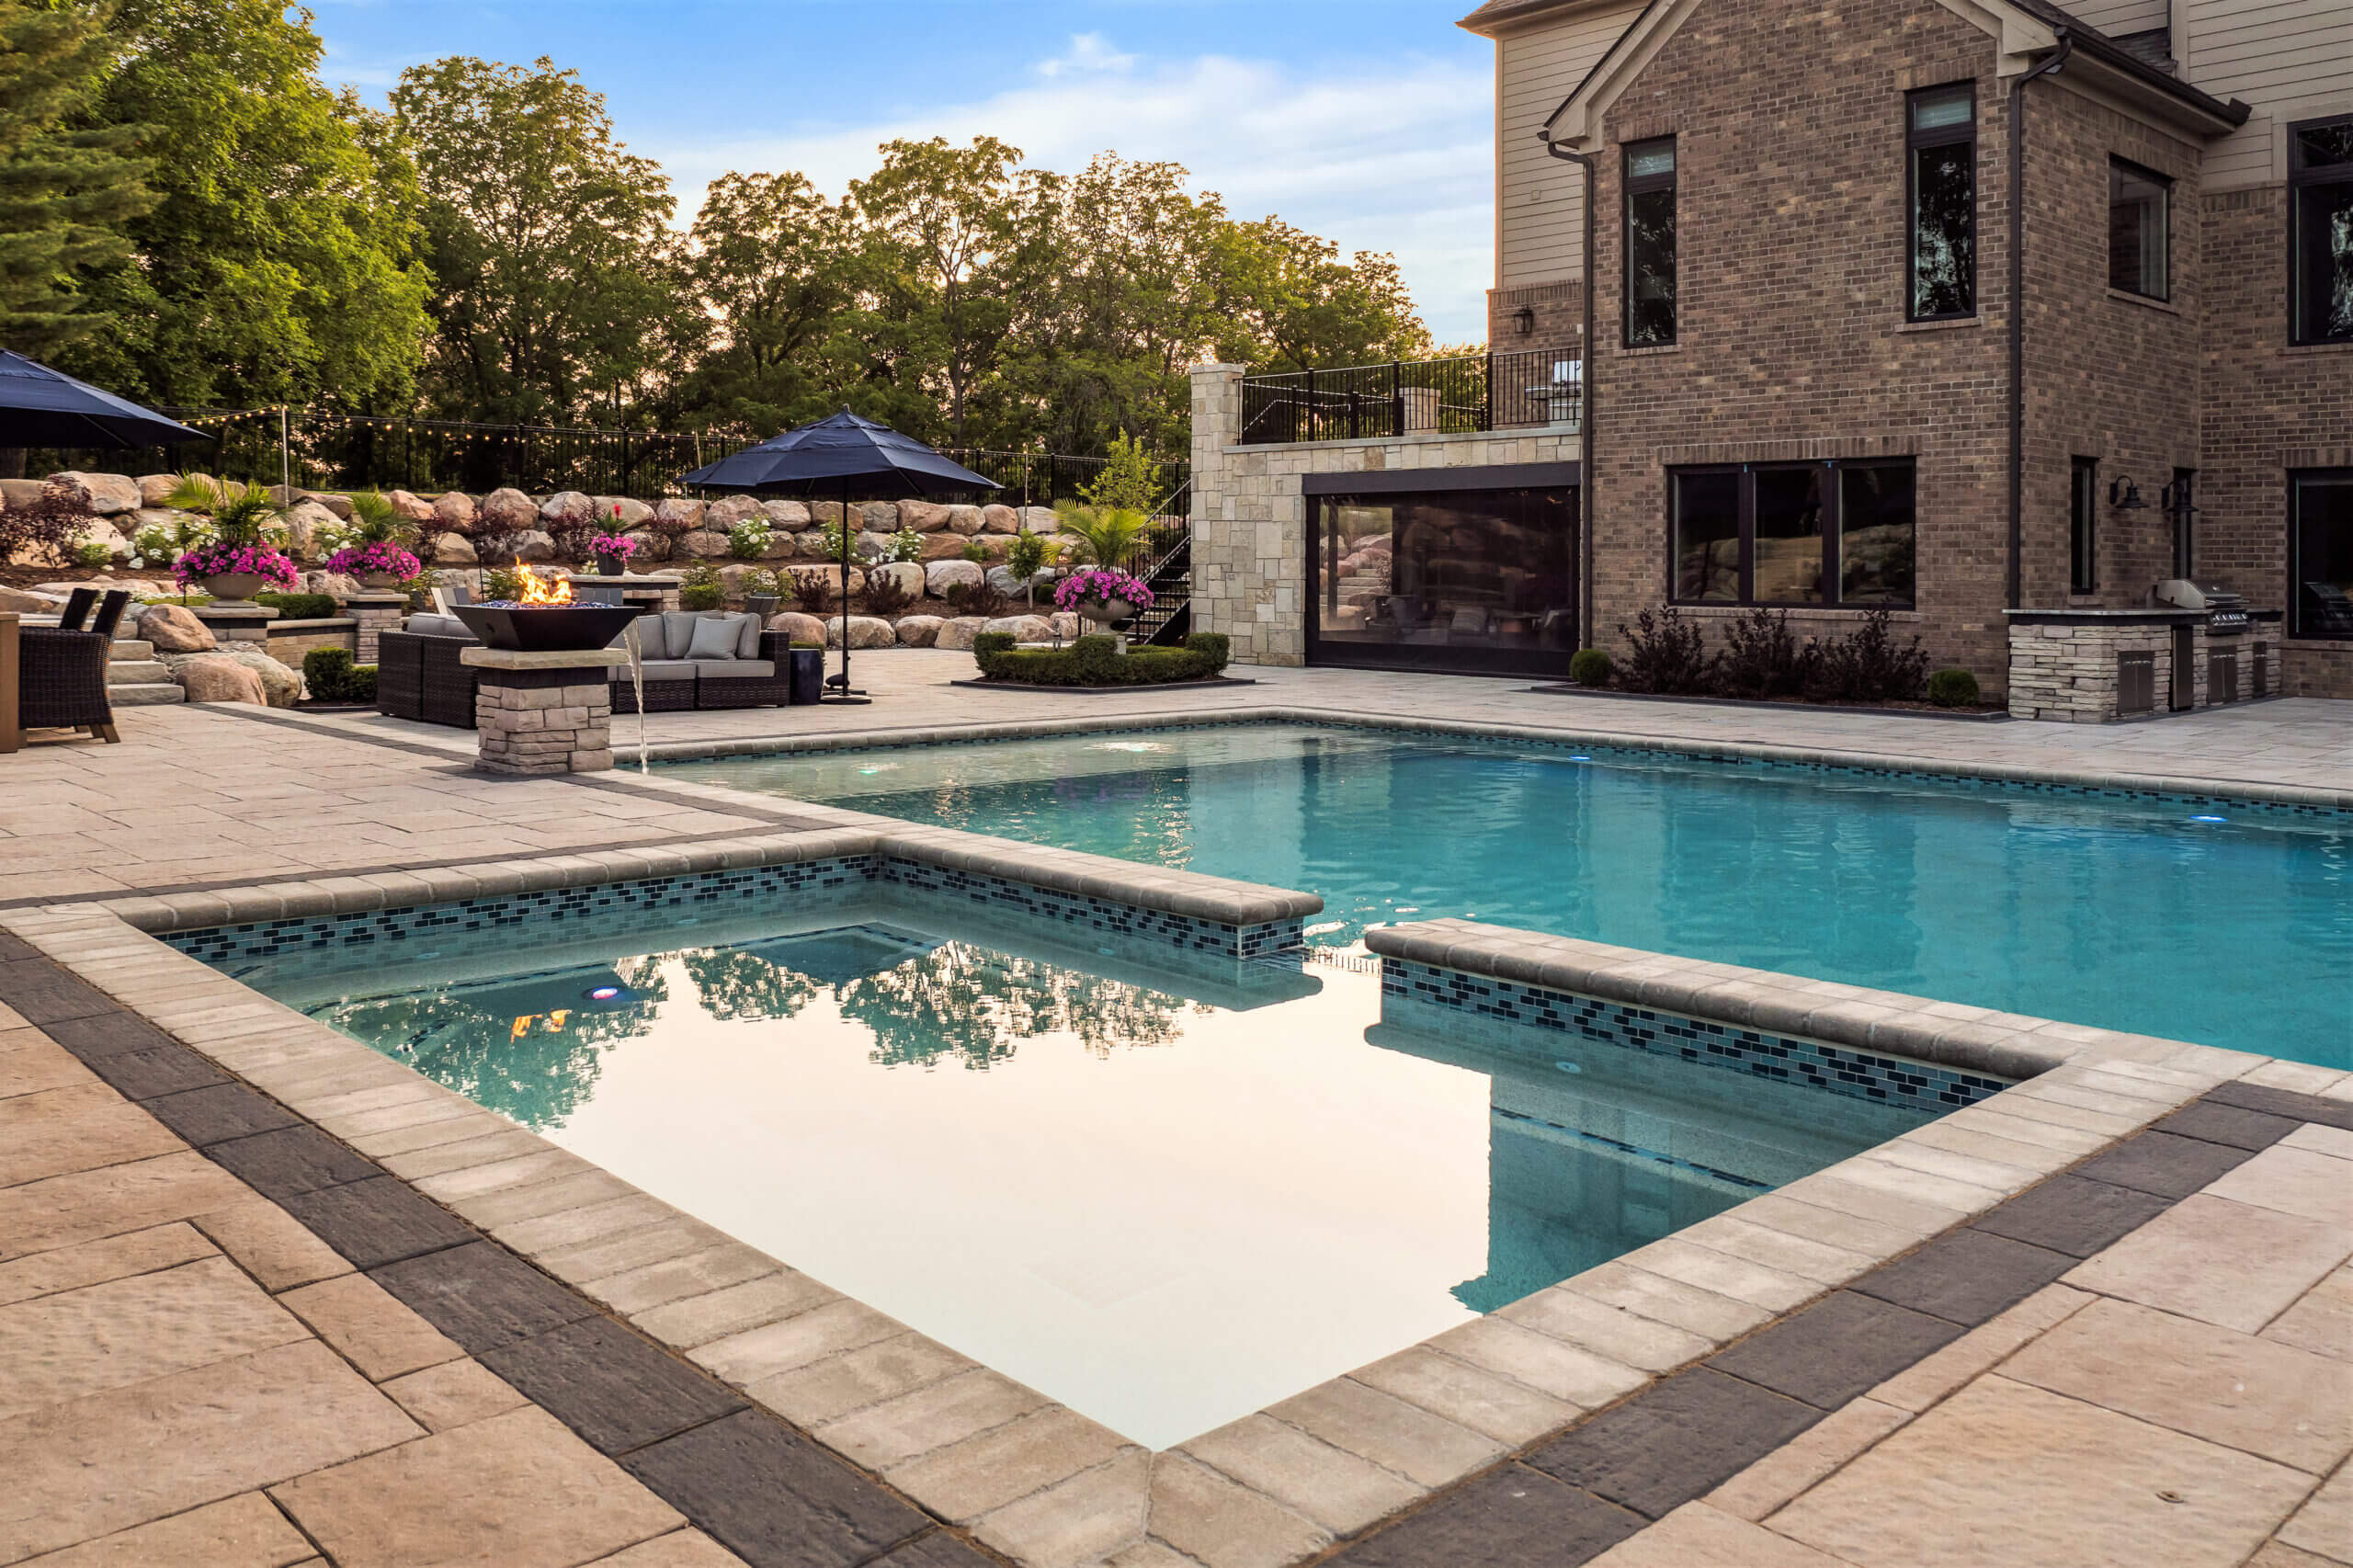 gunite pools, patio pavers, concrete paving, inground pools, pool and spa, fire bowls, patio covers in michigan, patio ideas, pool inspo, gazebos in michigan, cabanas in Michigan, backyard design, backyard landscape design, fire bowls, pool fountains, concrete builders, unilock, outdoor fireplaces in michigan, jacuzzi, outdoor hot tubs, pergola, gazebo, backyard ideas, patio design near me, fire glass, hot tub builder In michigan